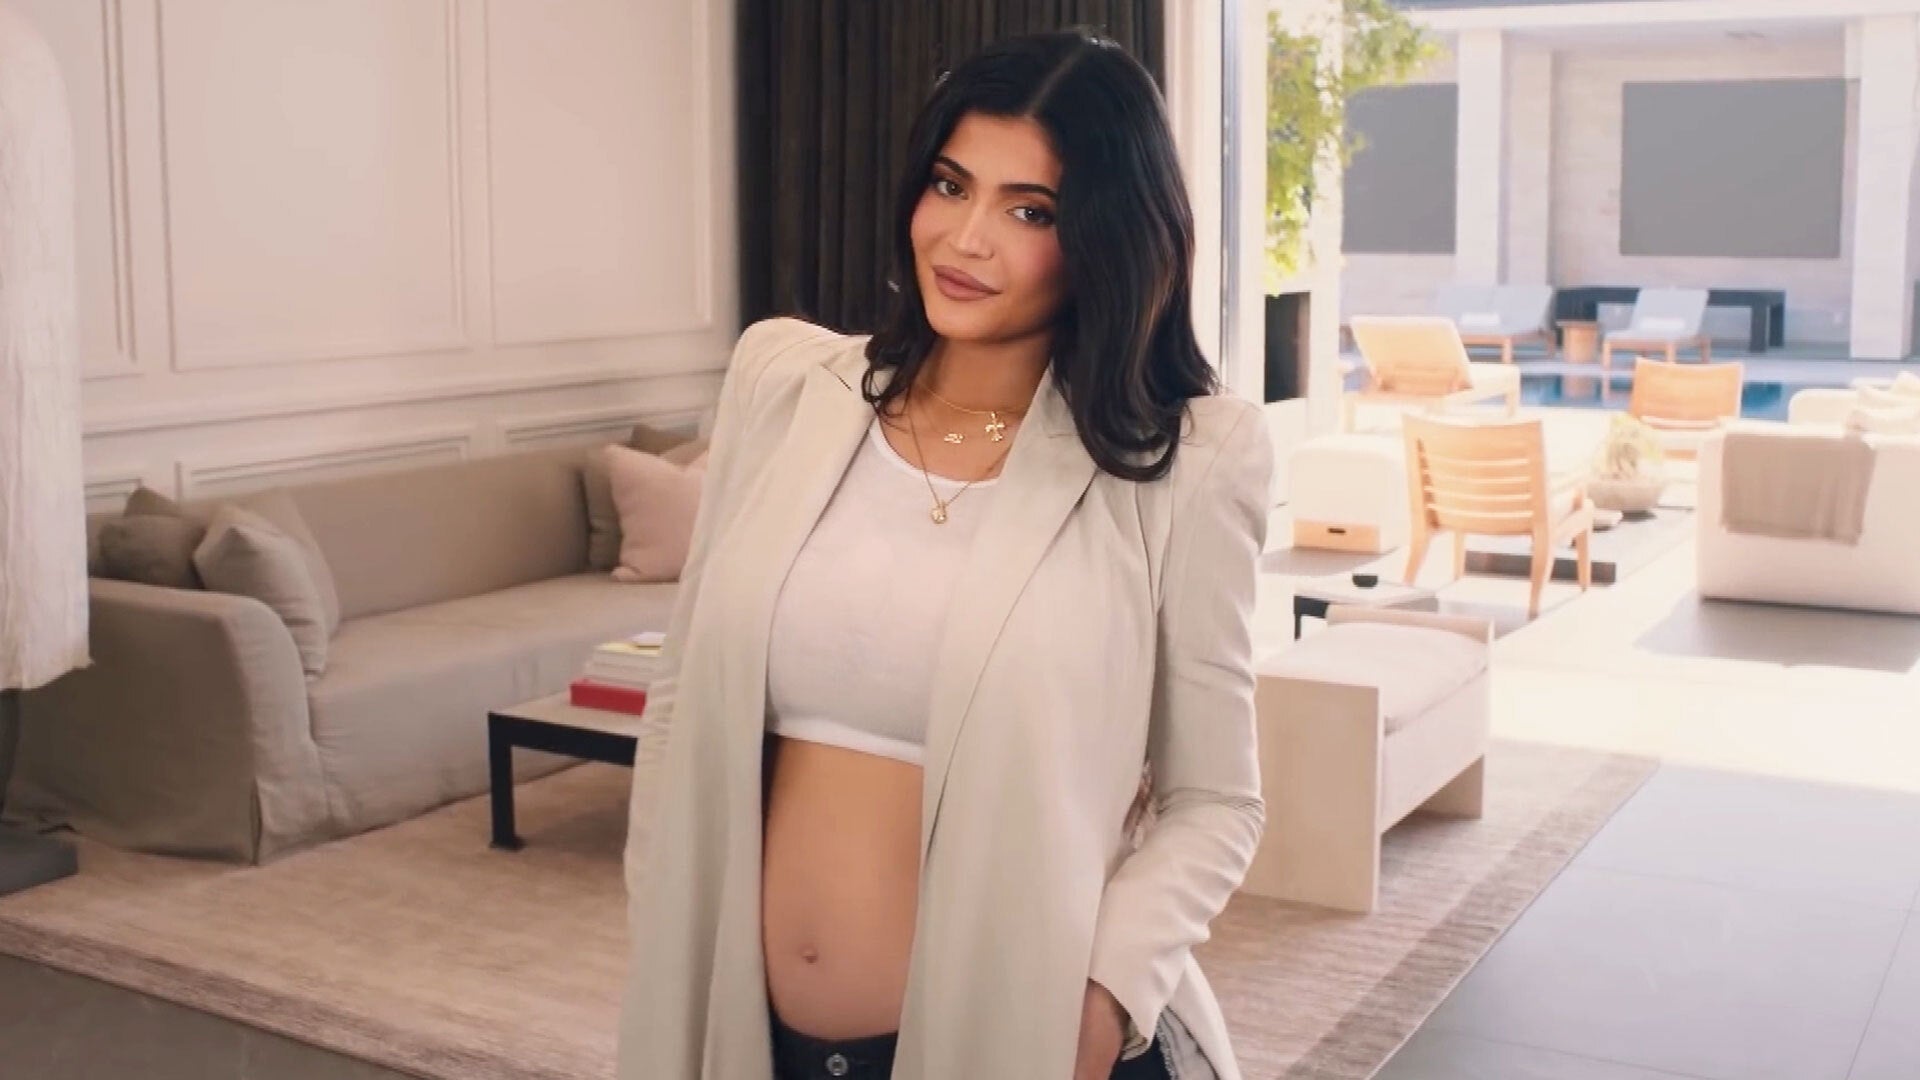 Kylie Jenner Wants to Have a Baby By 25 : Photo 3563675, Kylie Jenner  Photos